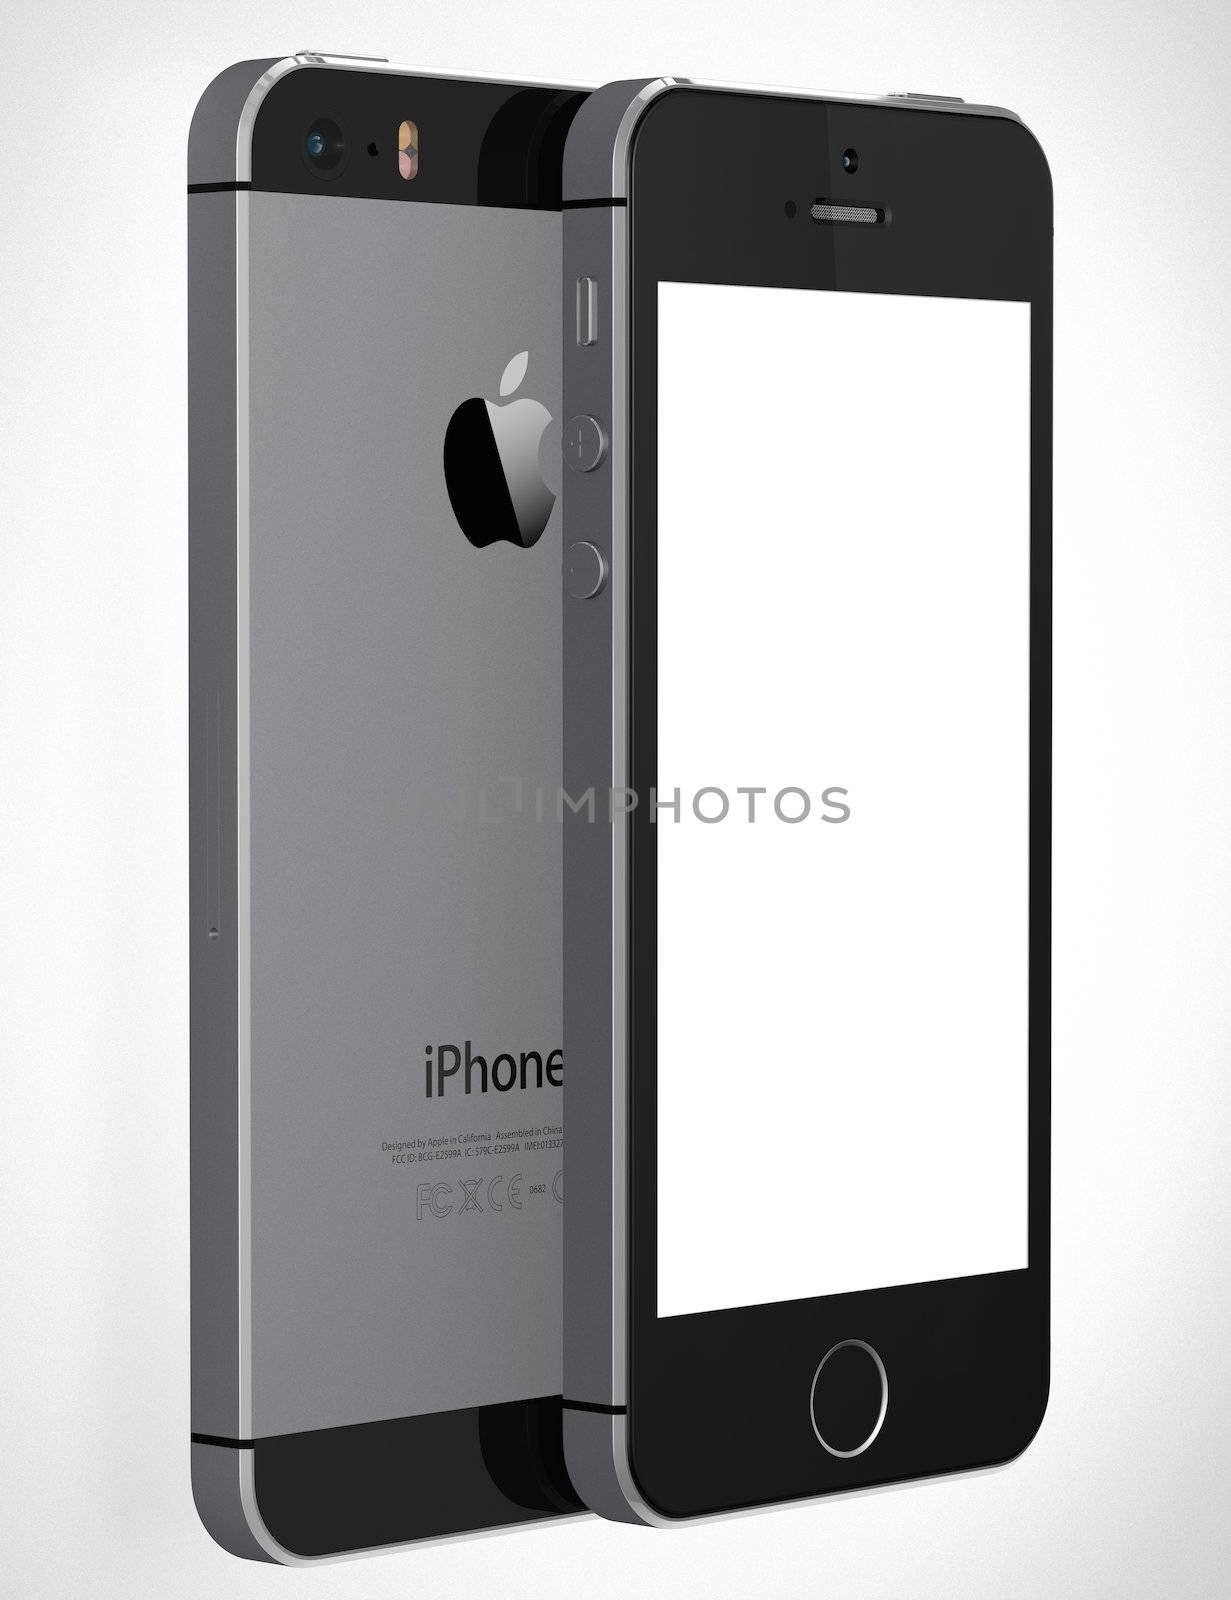 Galati, Romania - August 12, 2014:  A front view of an Apple iPhone 5s displaying a blank white screen. Some of the new features of the iPhone 5s include fingerprint recognition built into the home button, a new camera, and a 64-bit processor. Apple released the iPhone 5s on September 20, 2013.